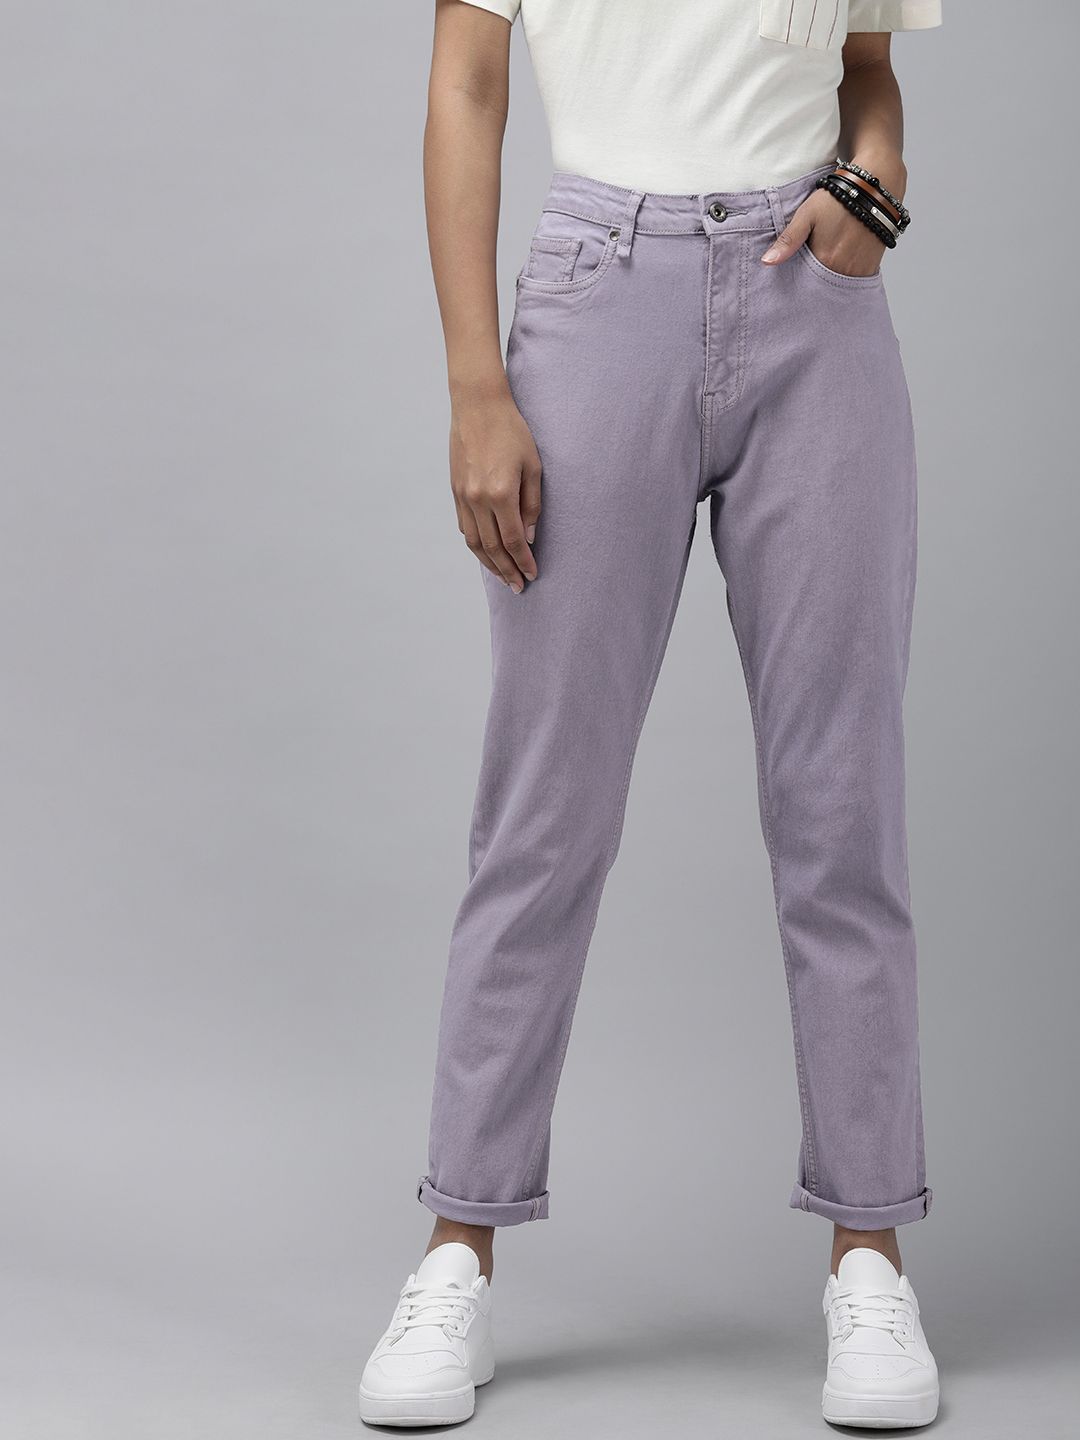 Roadster Women Lavender Flared Stretchable Jeans Price in India